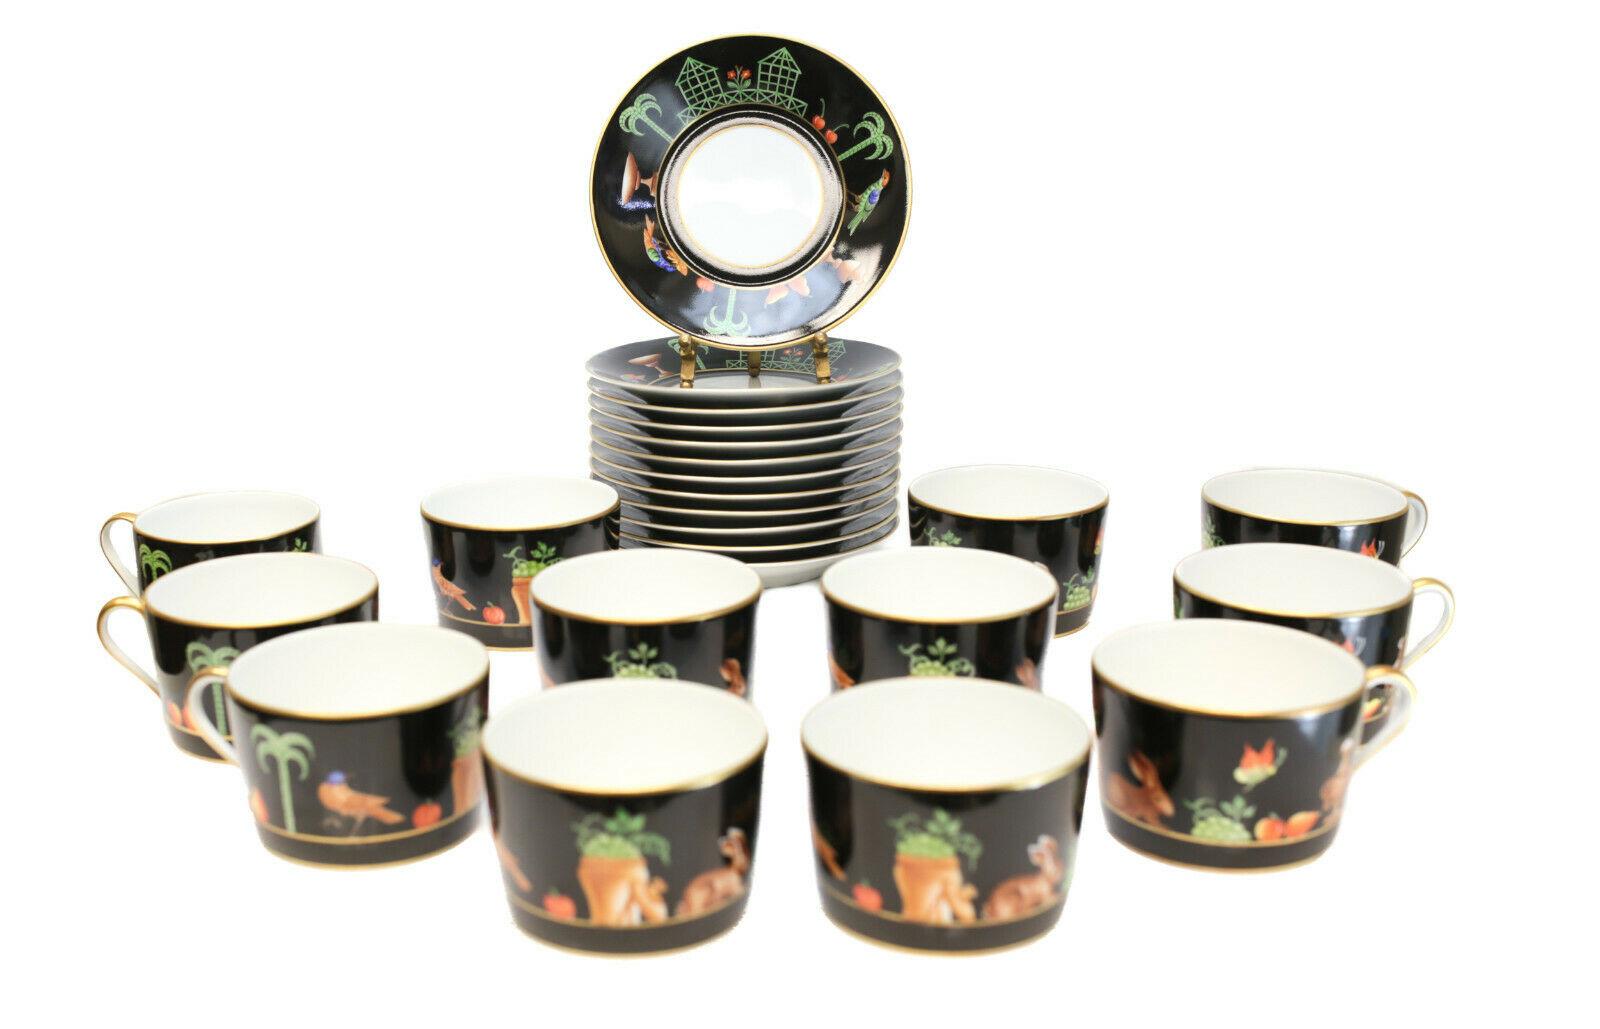 12 Tiffany private stock Le Tallec porcelain tea cup and saucers in black shoulder. Beautiful hand painted tropical birds, trees, fruits, and rabbits to a black and gilt ground. Tiffany private stock mark with the Le Tallec mark and artist initials